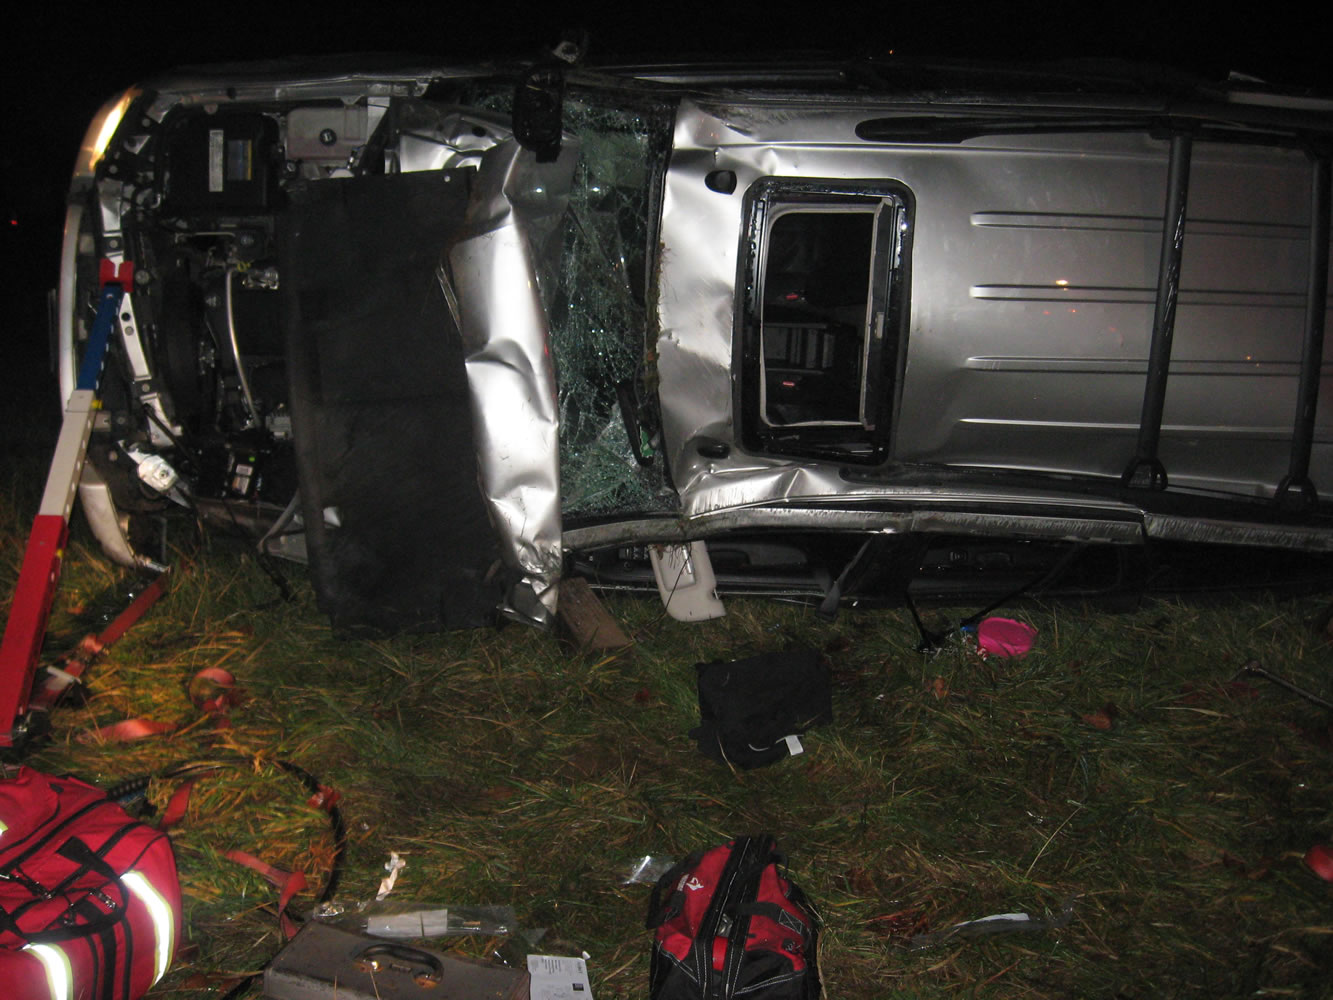 Photo by Fire District 3 Chief Steve Wrightson 
Friday night this GMC SUV was southbound on Northeast Caples Road when it rolled several times off the road into a field. The driver, who was extricated by firefighters from the SUV, was transported to an area hospital.